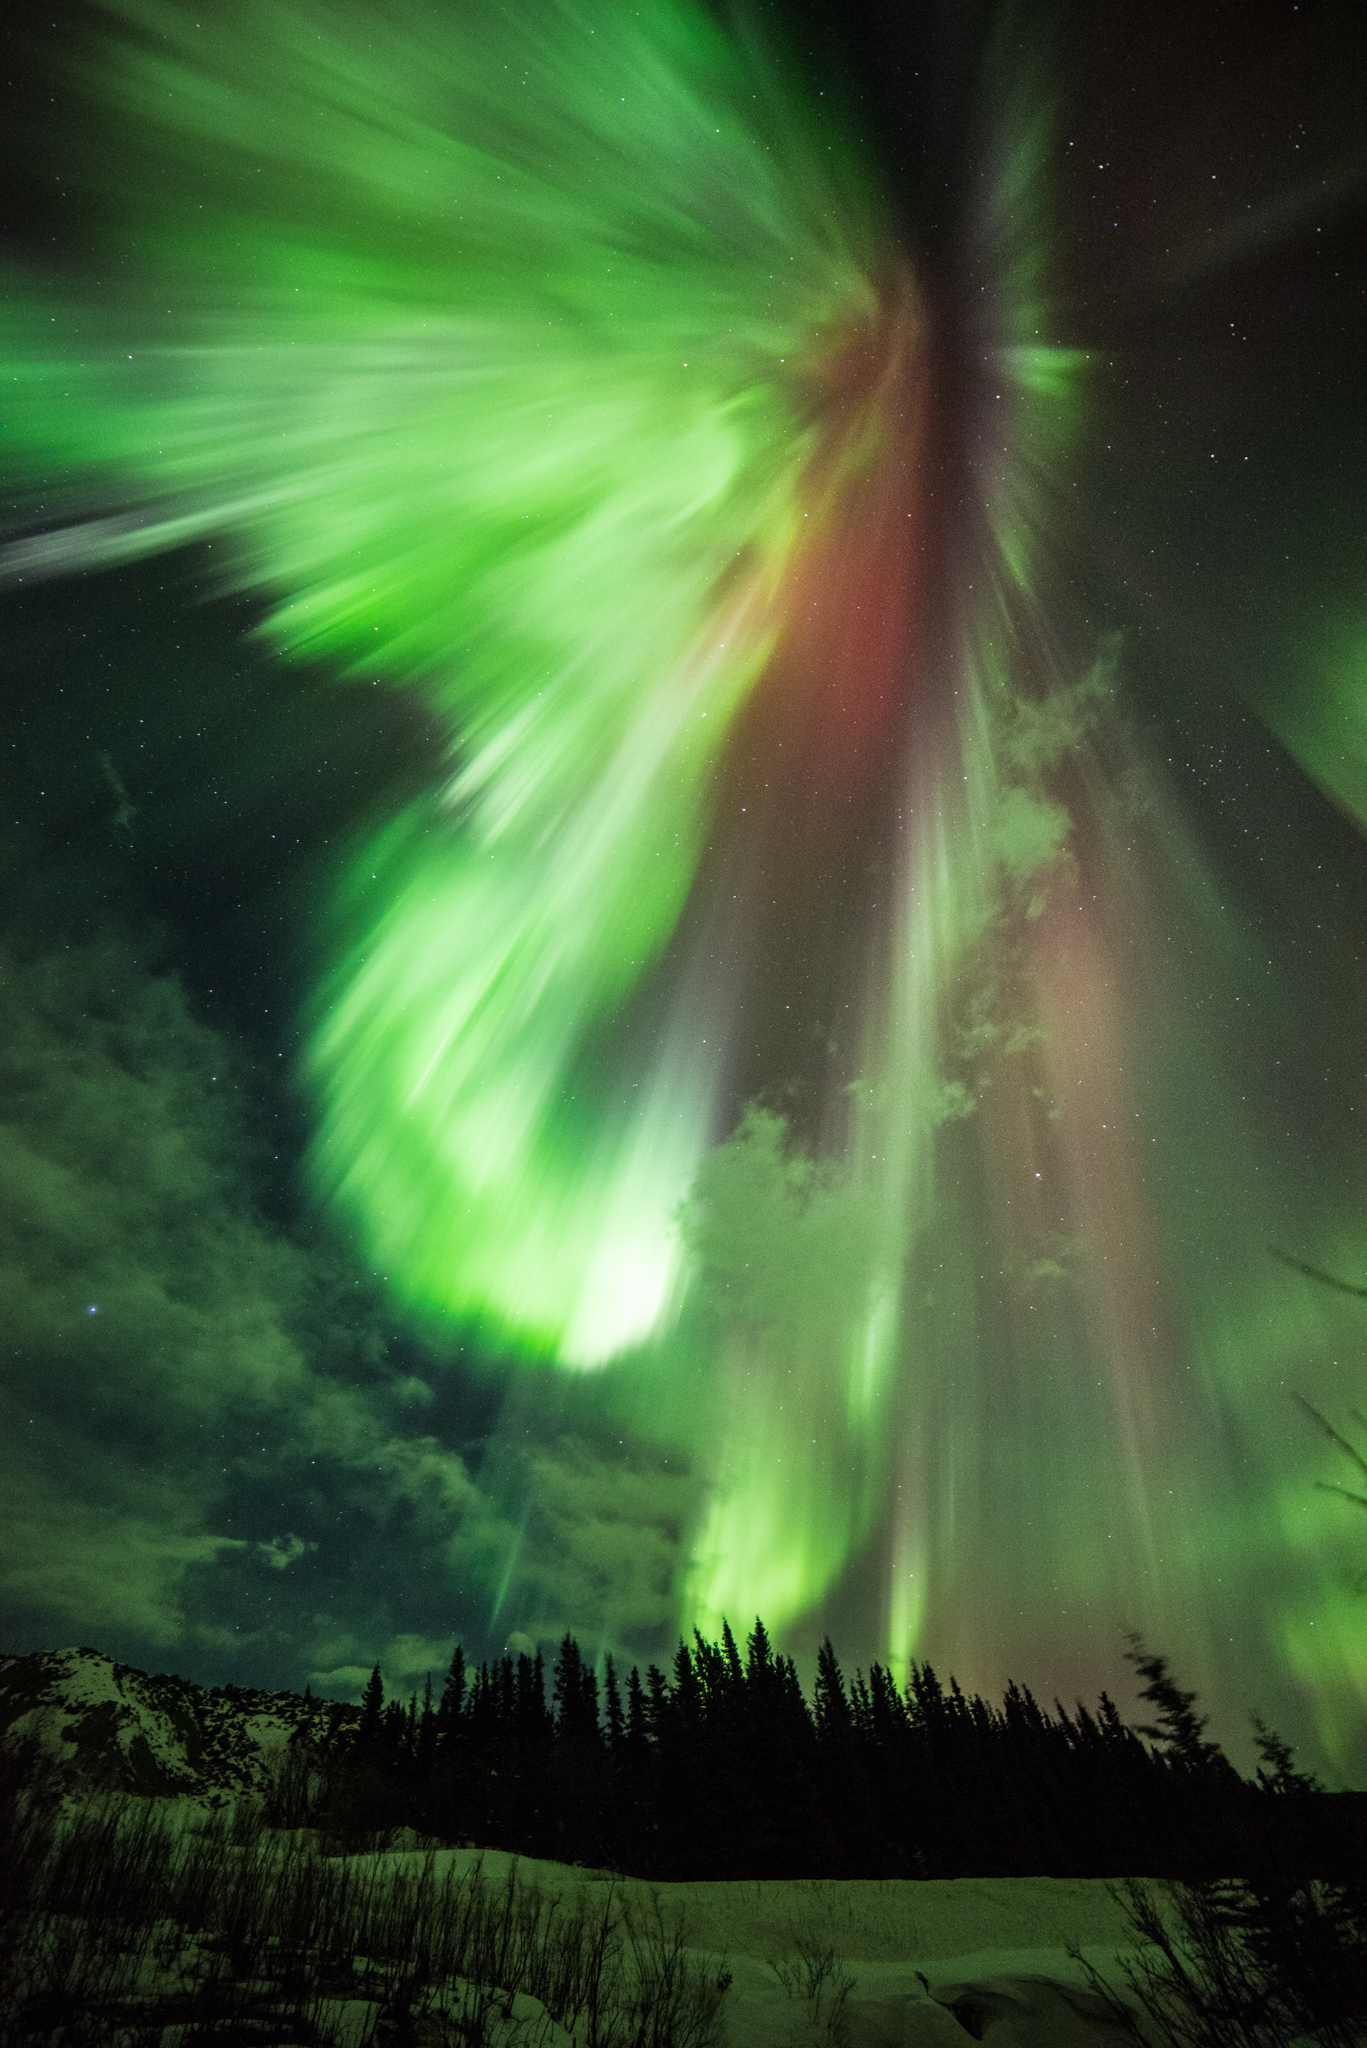 The green lights of an aurora dramatically explode outward against the backdrop of the night sky peppered with fluffy white clouds and pinprick stars. A hint of red is also visible in the center of the light. Pine trees cast in shadow are seen below.